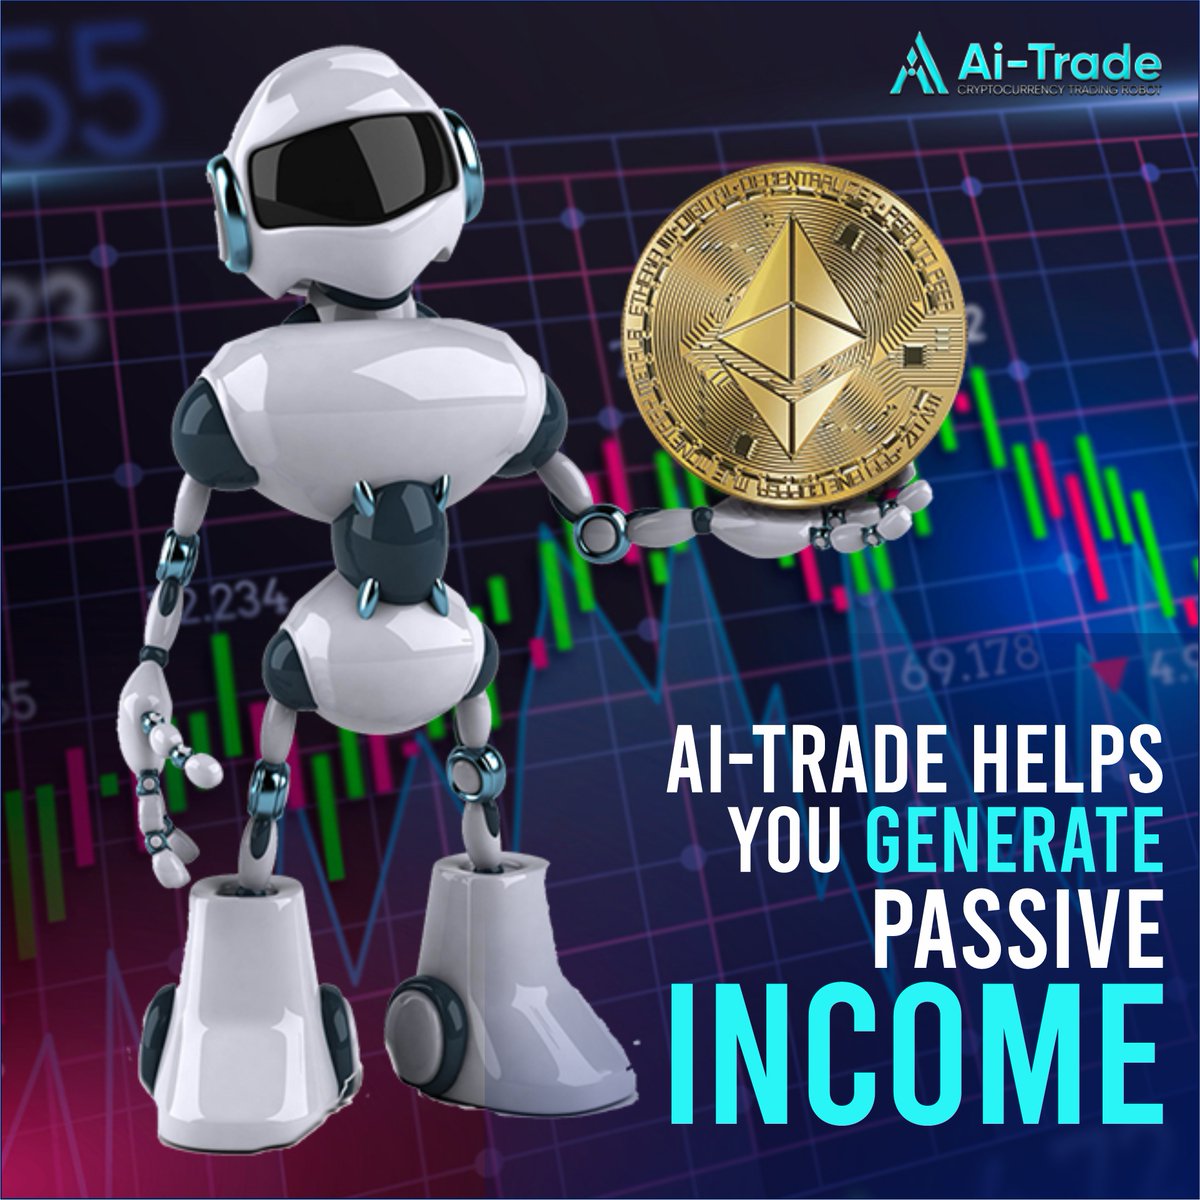 Ai-trade is suitable for those who want to build a community to generate extra monthly passive income for a sound financial future. Trade automatically and earn profit.

🌐 ai-trade.io/sign-up
Visit our website
🌐 ai-trade.io
.
#AITrade #PassiveIncomeGeneration